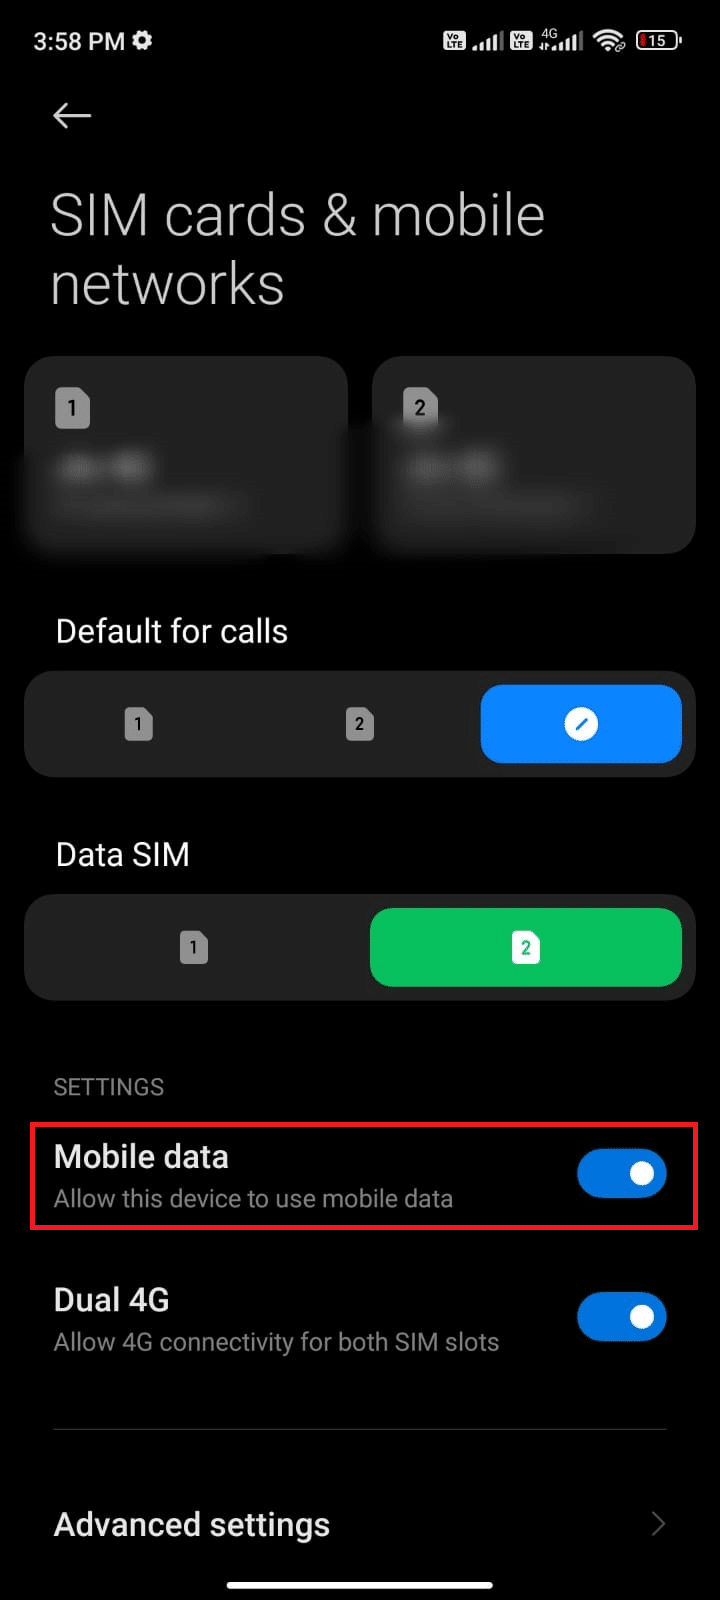 make sure the Mobile data option is turned on 